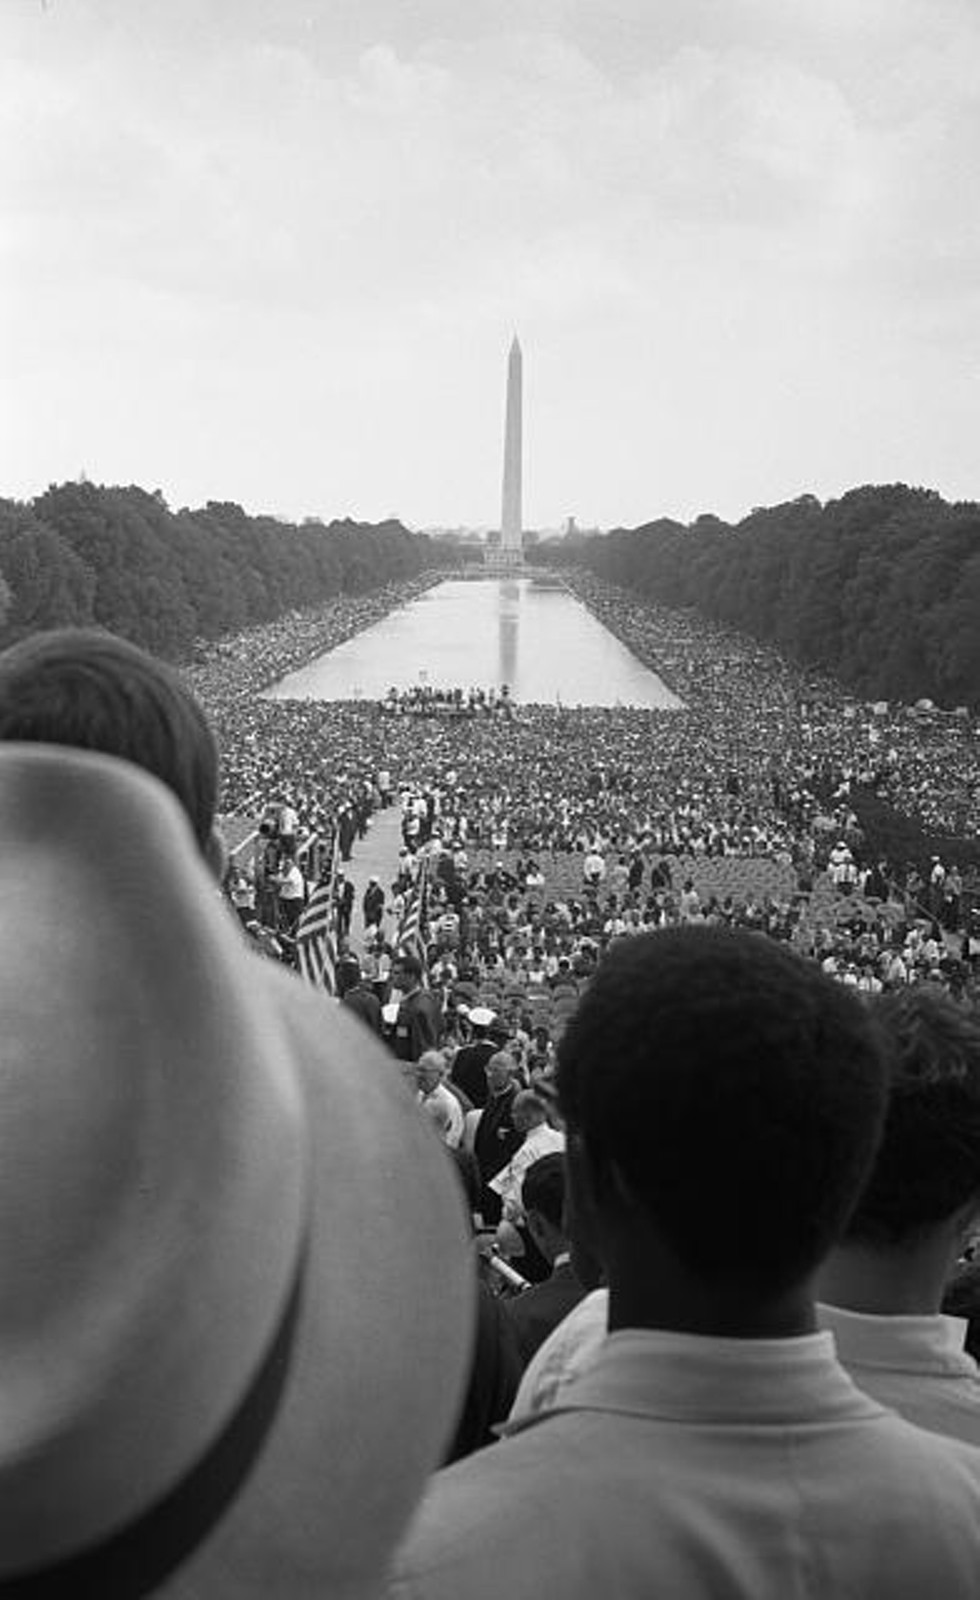 08a7bf83_civil_rights_march_on_wash_dc_1963.jpg